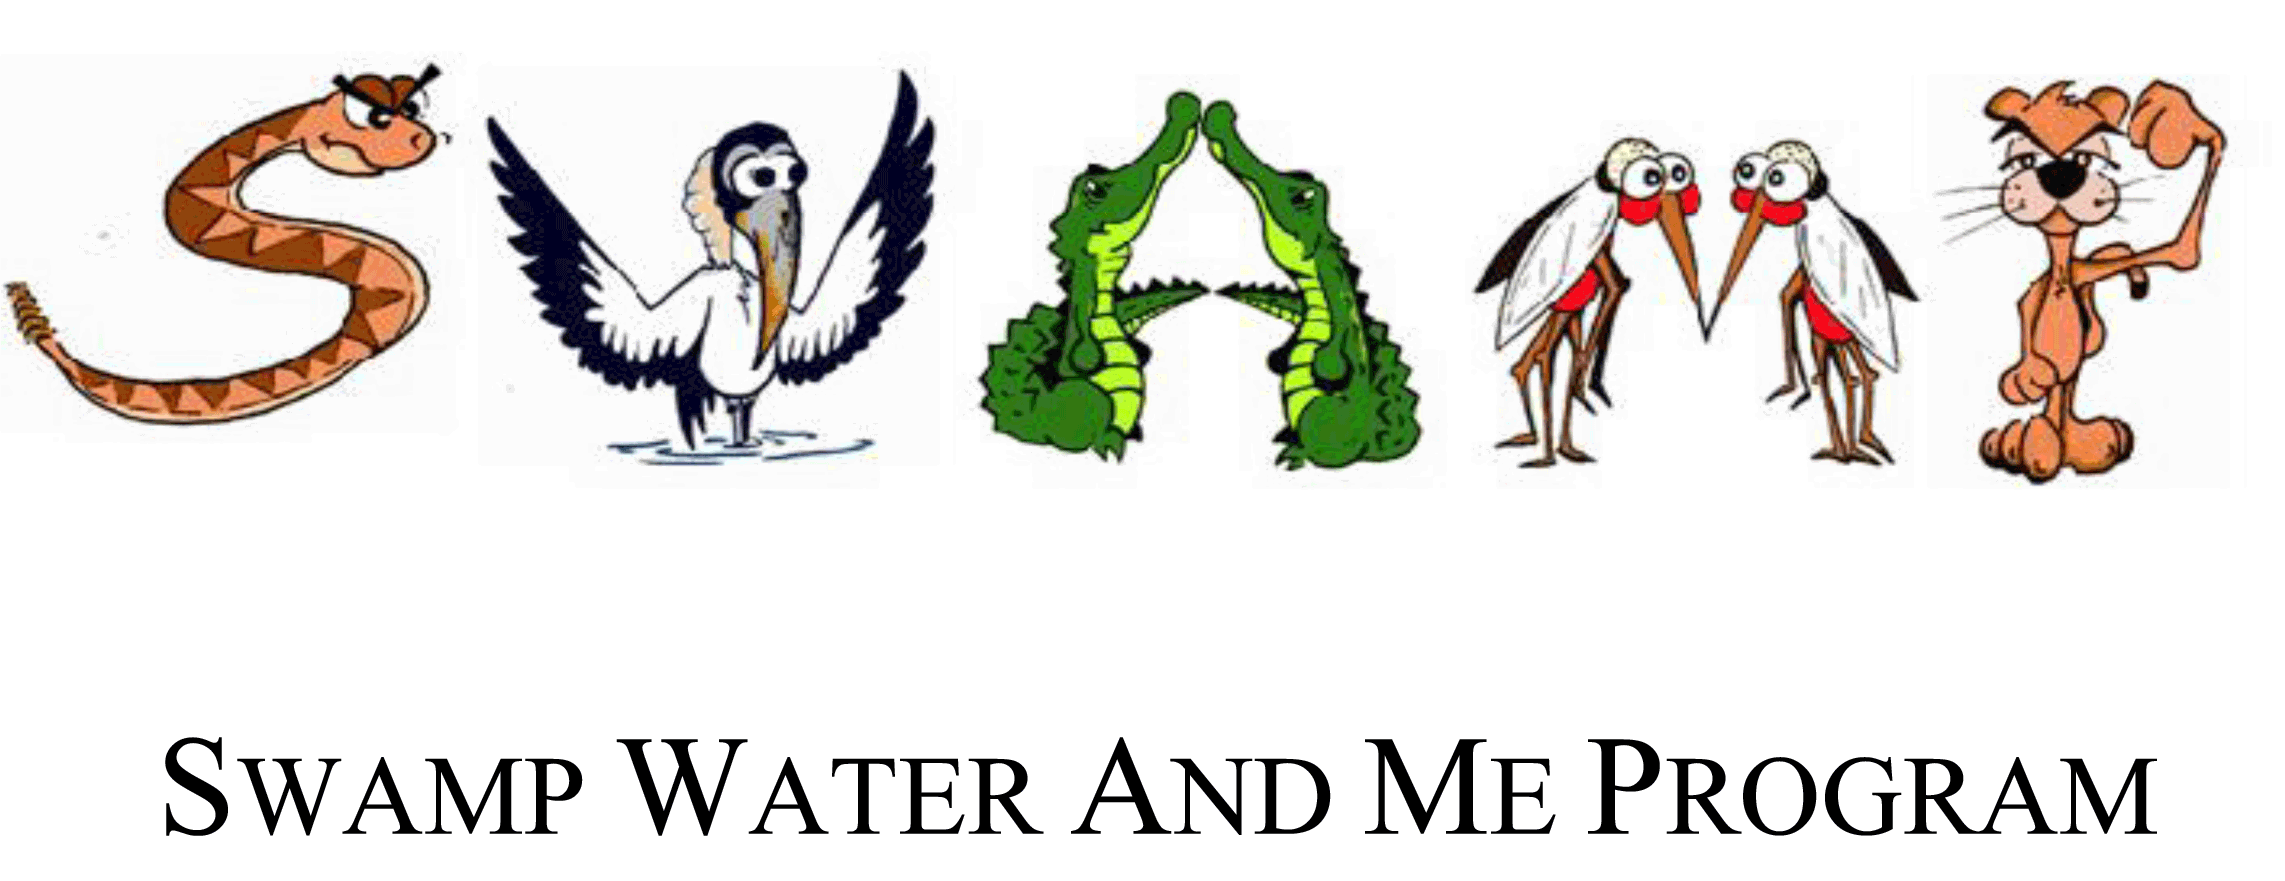 Cartoon animals form the letters in the acronym SWAMP (Swamp Water and Me Program). Snake: S; Wood Stork: W; Two Alligators: A; Two Mosquitoes: M; Panther: P.